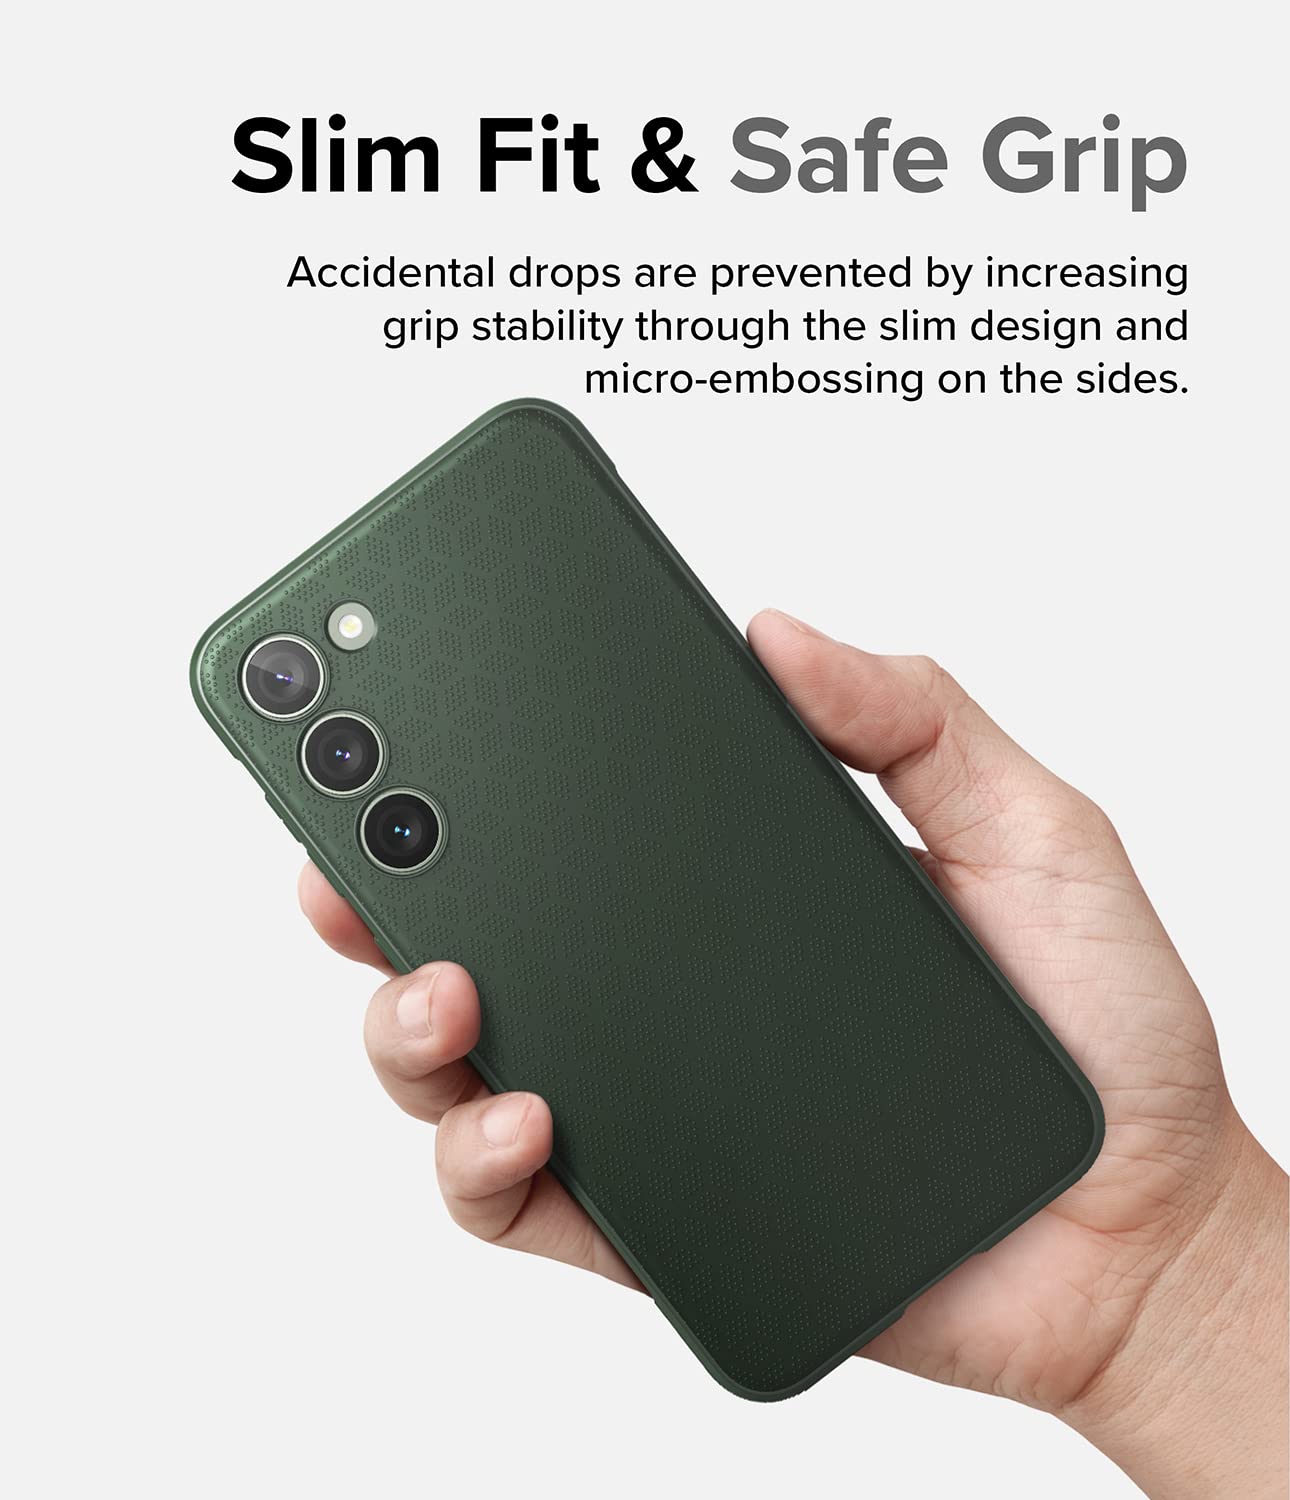 Ringke Onyx [Feels Good in The Hand] Compatible with Samsung Galaxy S23 Plus Case 5G, Anti-Fingerprint Technology Non-Slip Enhanced Grip Smudge Proof Cover Designed for S23 Plus Case - Dark Green